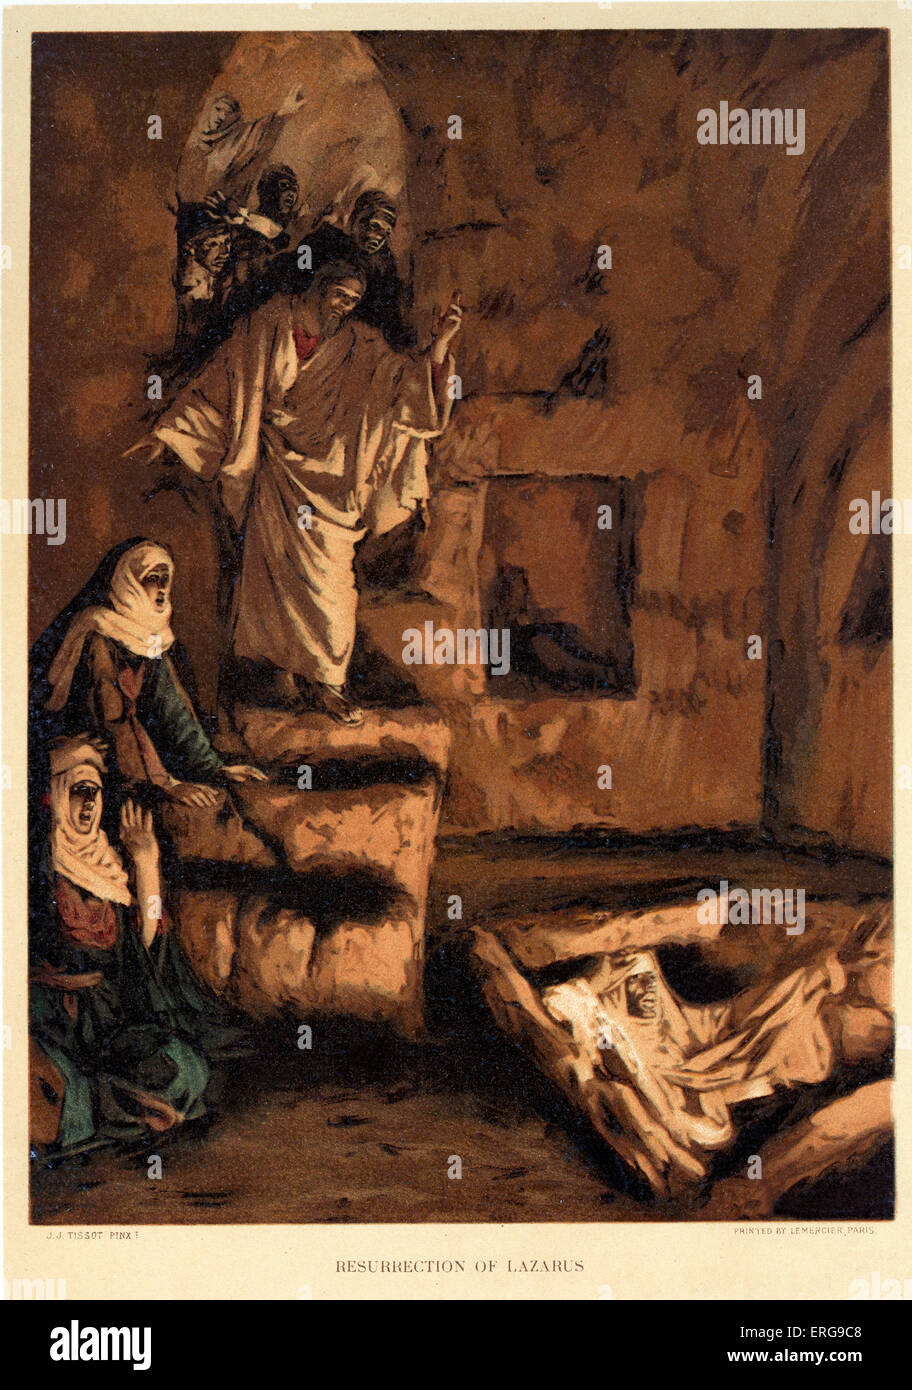 Resurrection of lazarus - St John, Chapter 11.  Illustrated by J James Tissot. French painter 15 October 1836 – 8 August 1902. Stock Photo